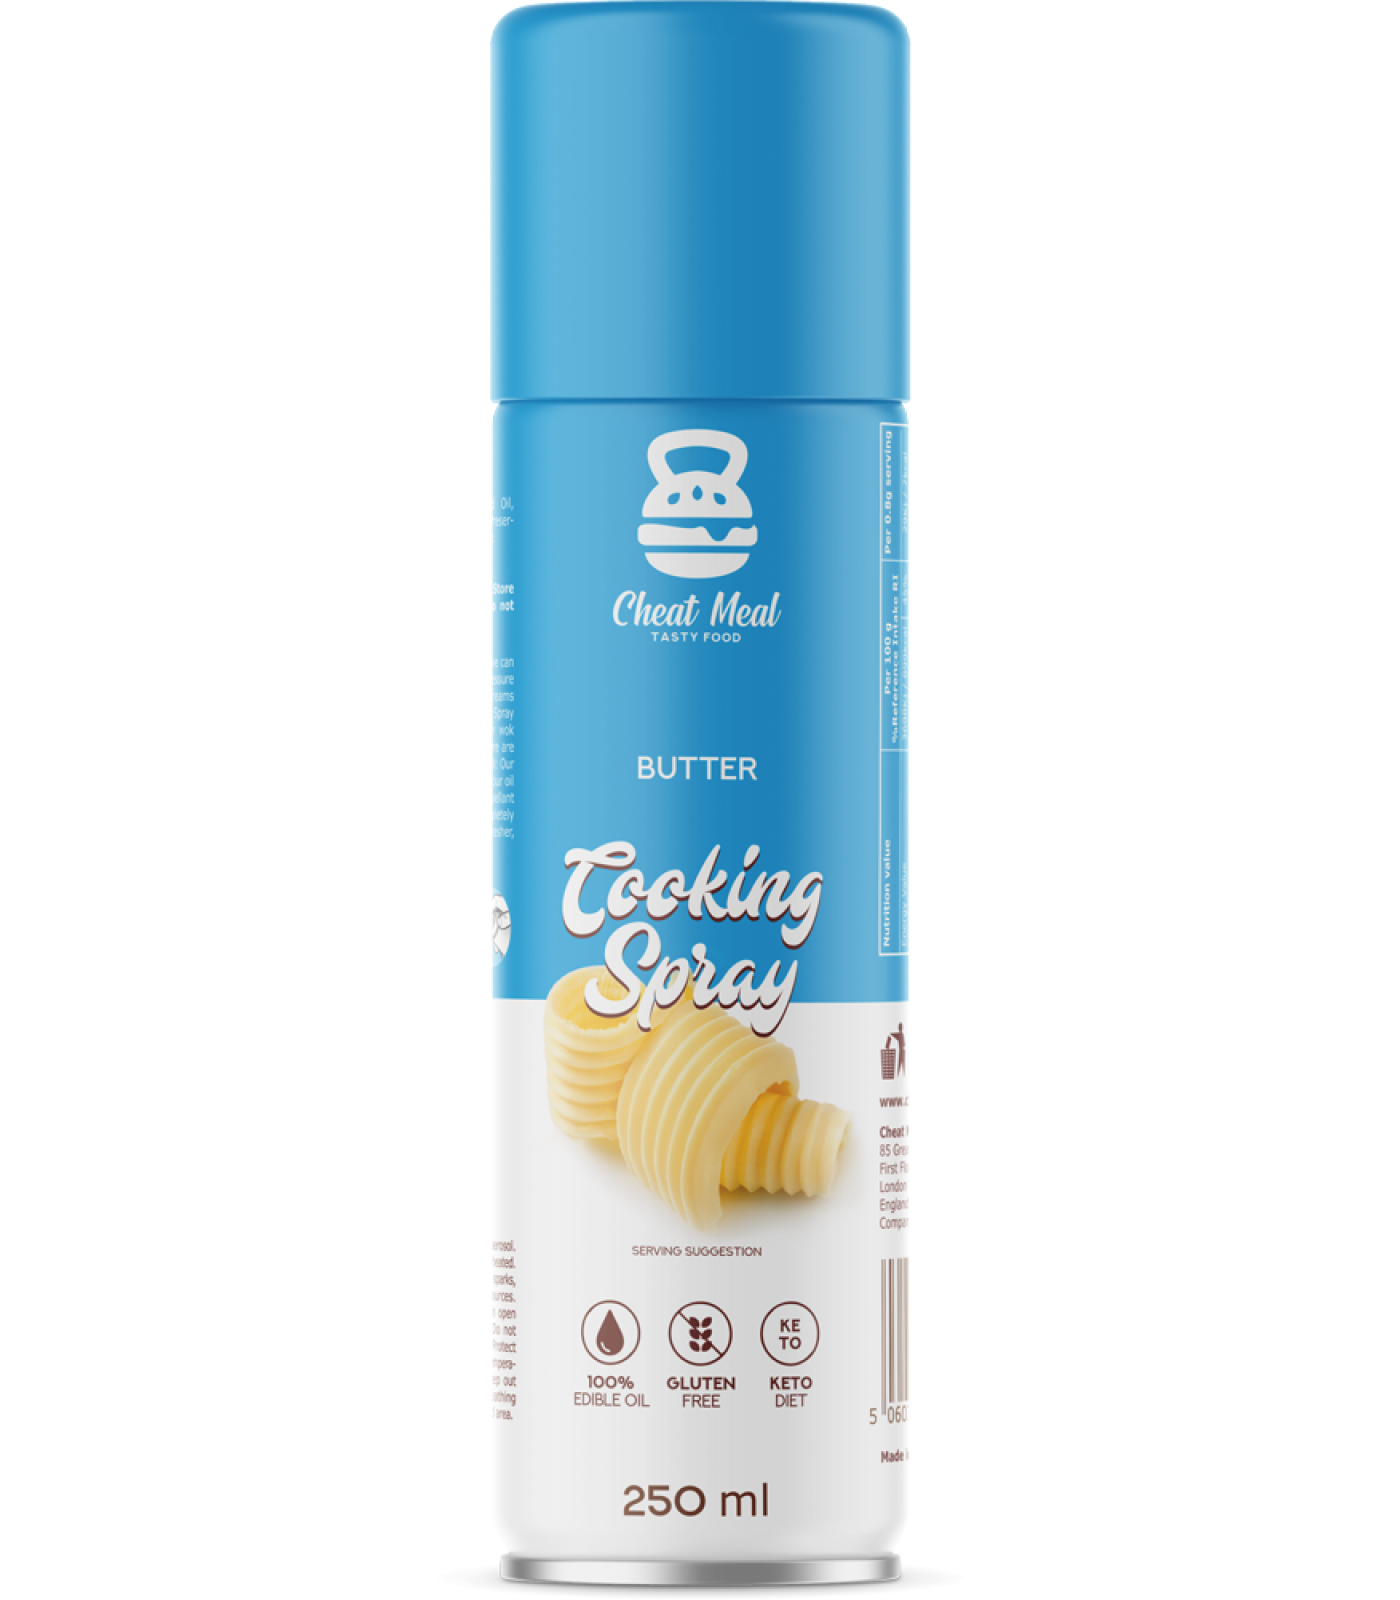 Cheat Meal Cooking Spray / Butter / 250ml